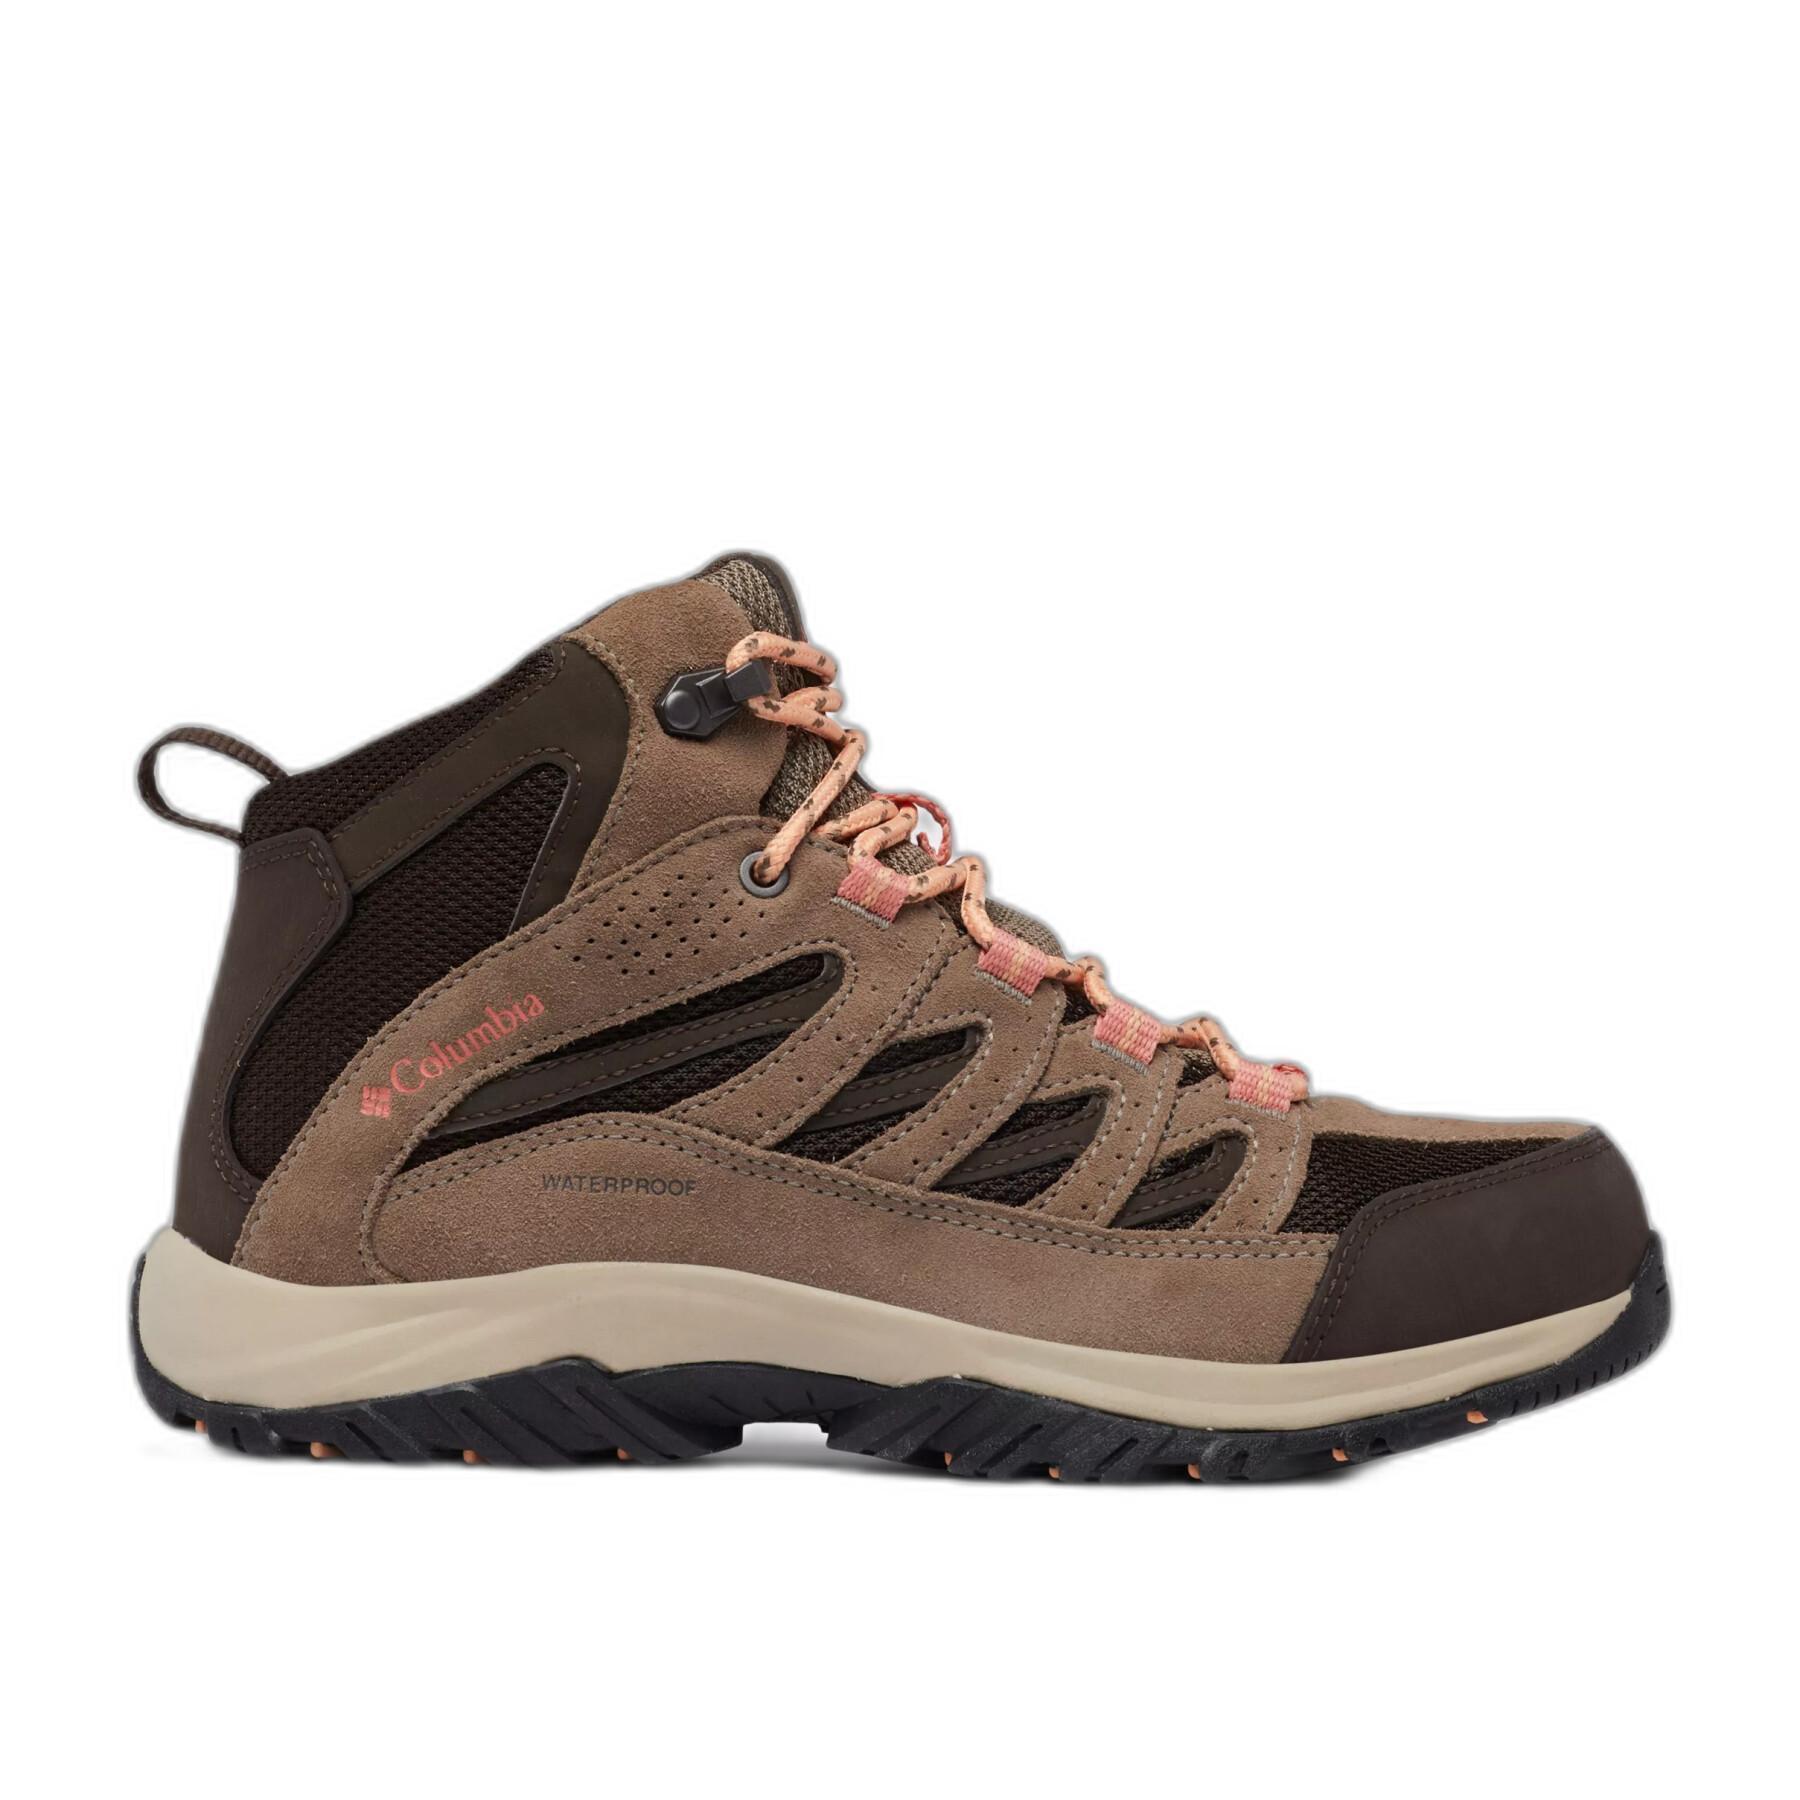 Waterproof hiking shoes for women Columbia Crestwood™ Mid